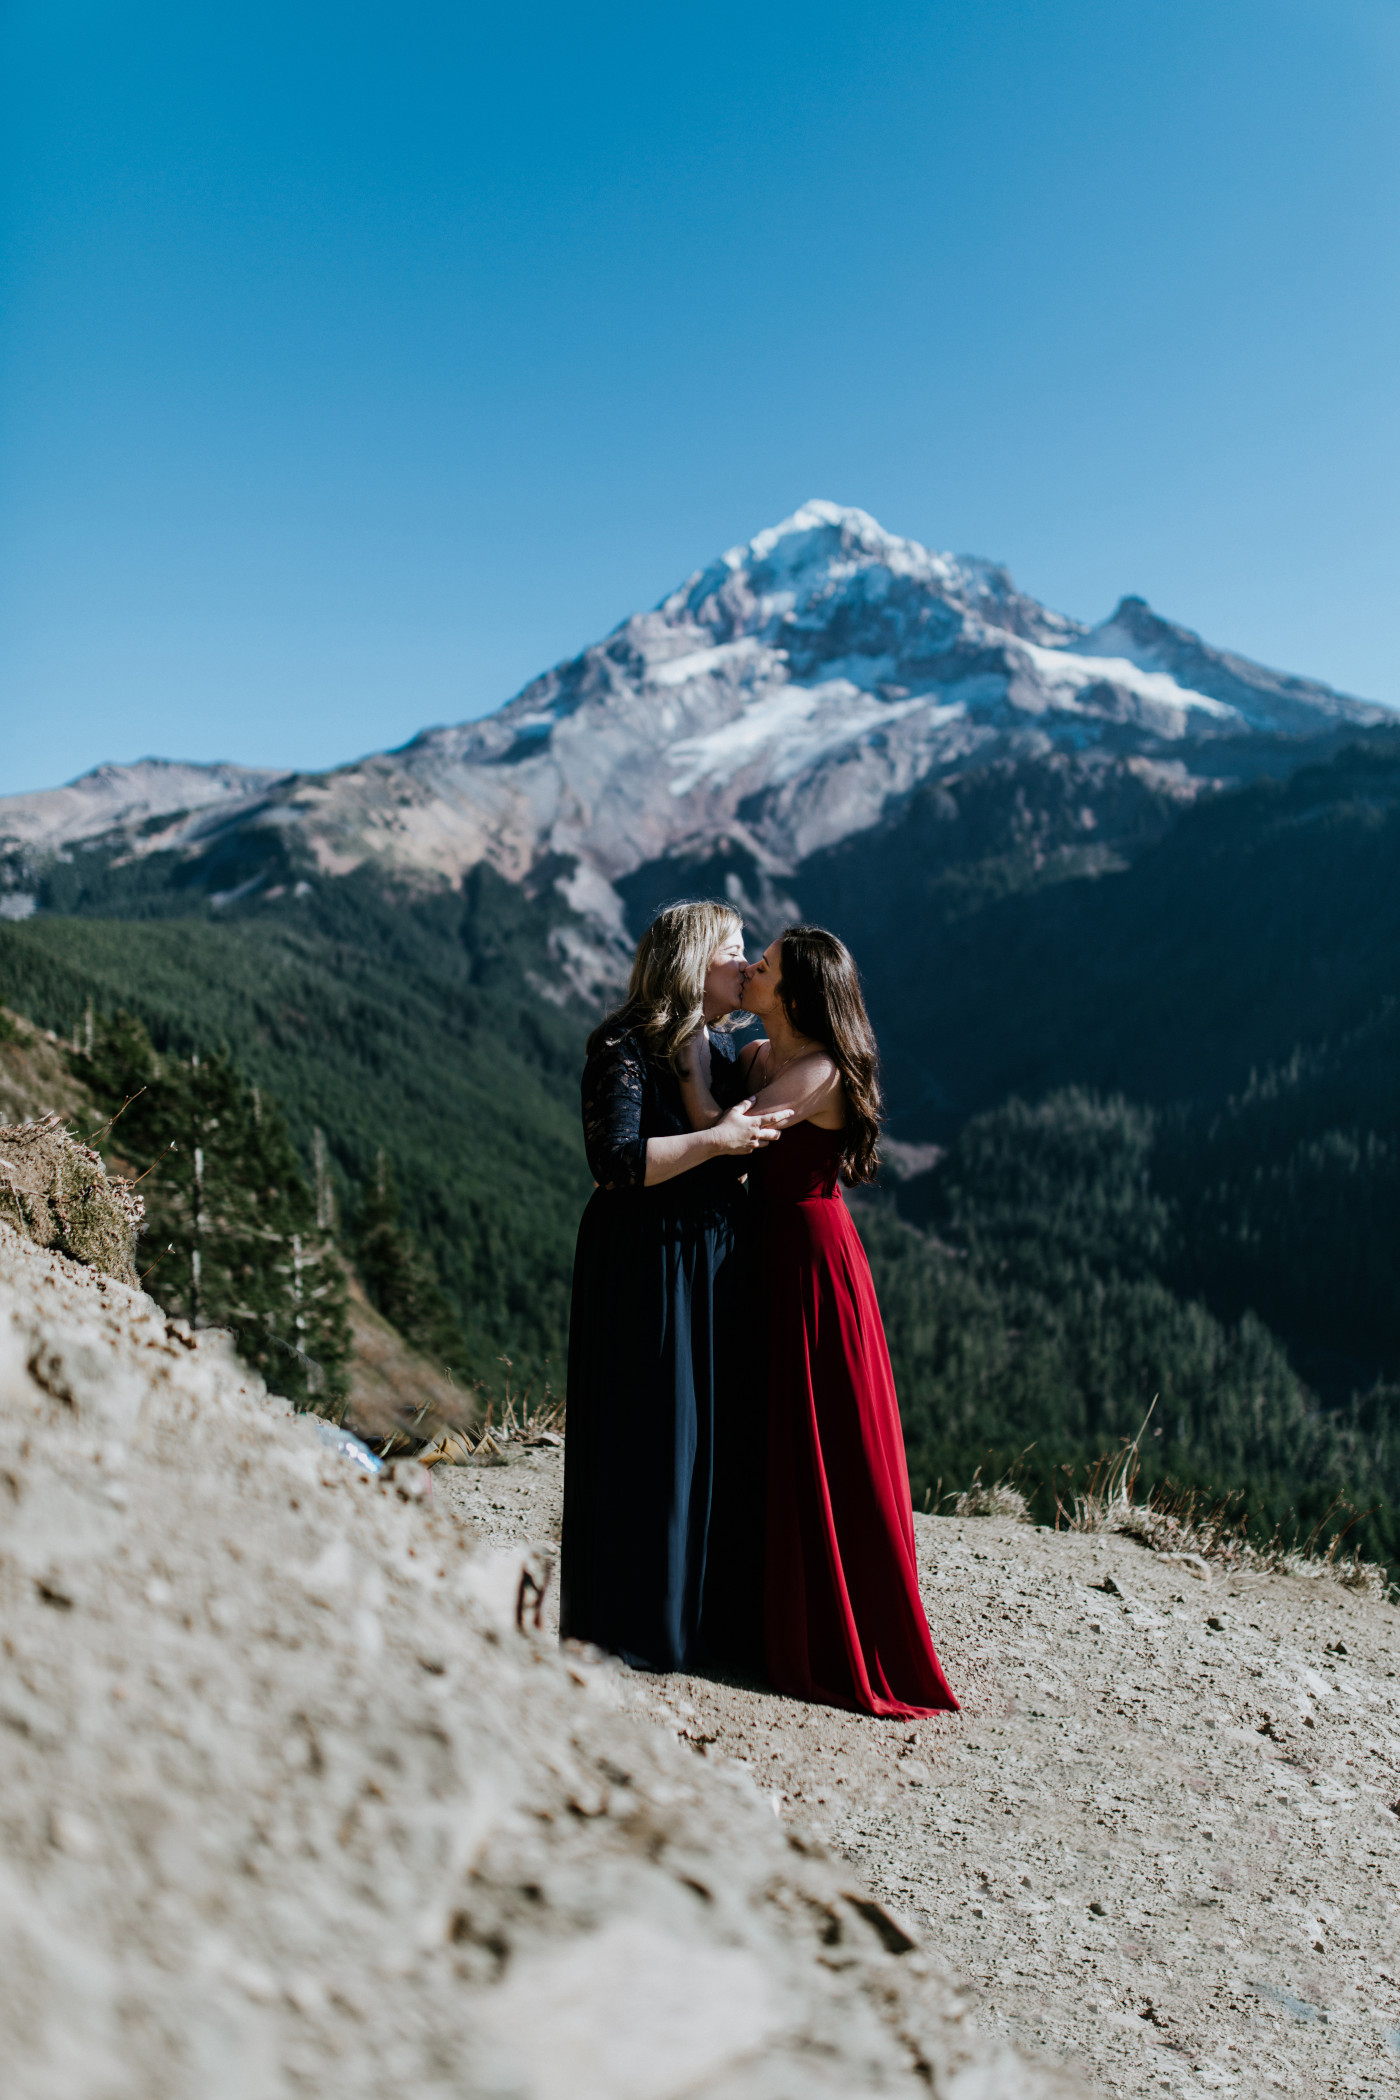 Tiffany and Hayley kiss with Mt Hood as the backdrop. Elopement photography at the Columbia River Gorge by Sienna Plus Josh.